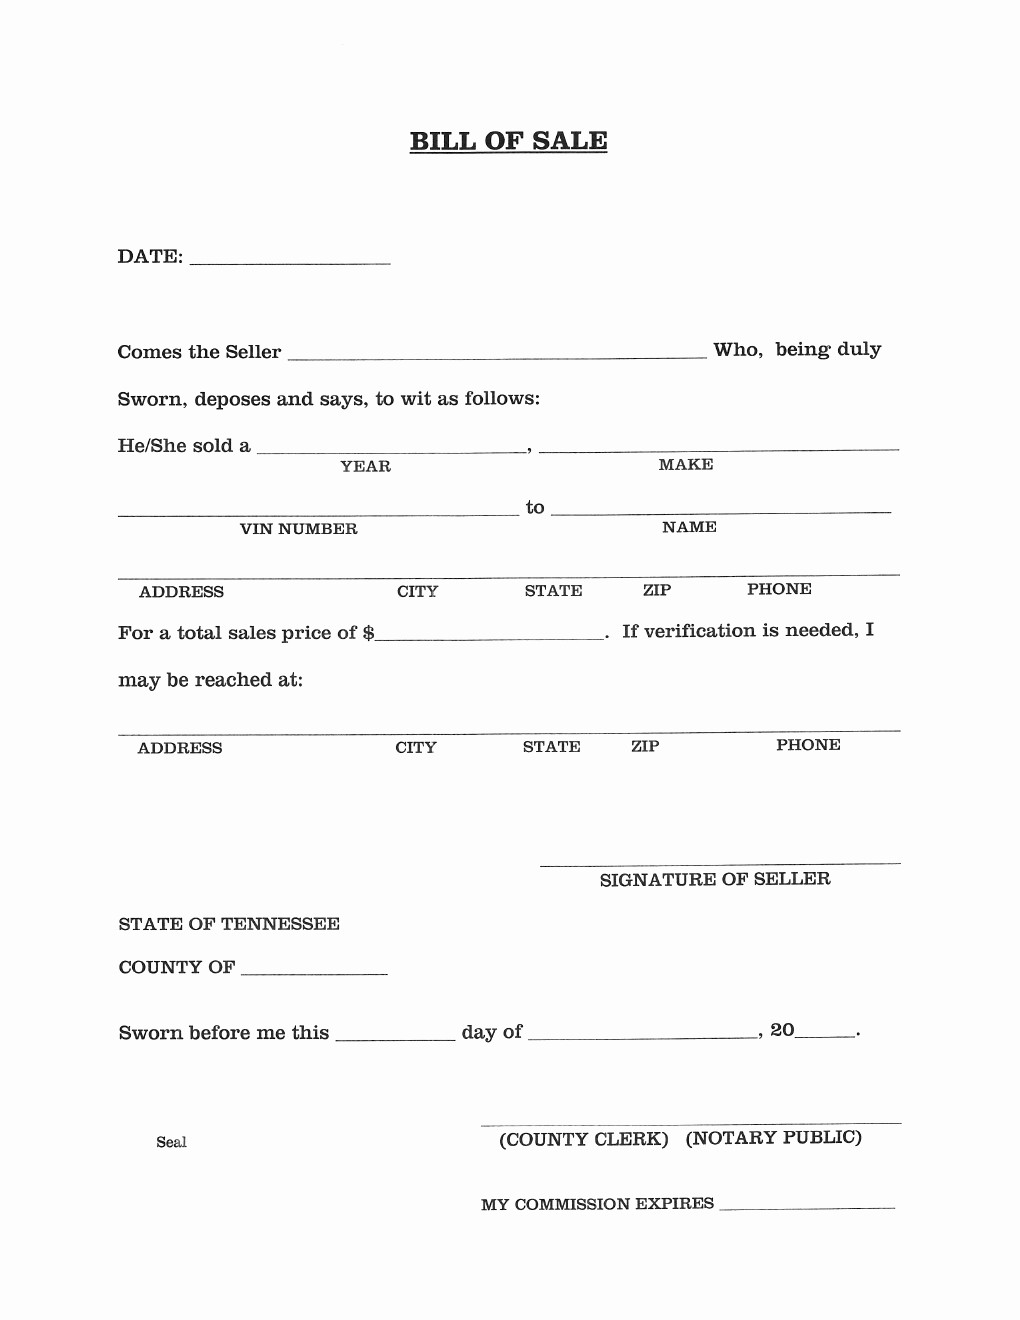 Bill Of Sale form Download New Free Tennessee Vehicle Bill Of Sale form Download Pdf